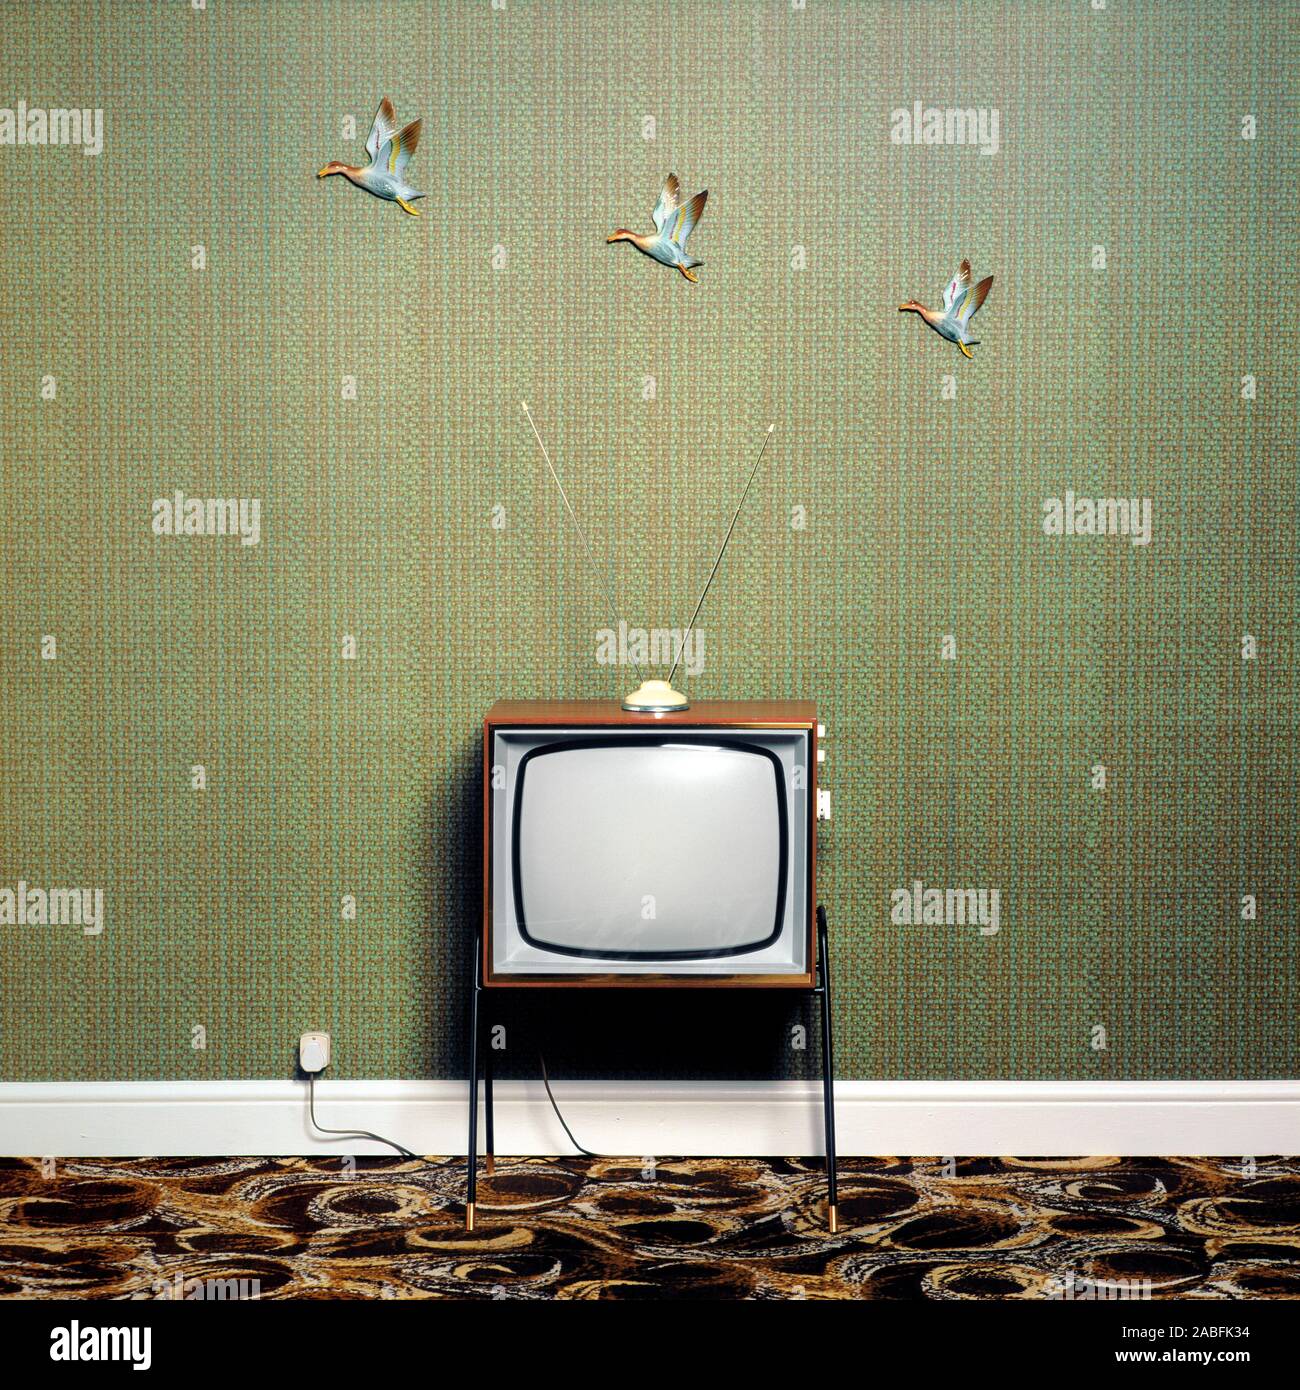 1960s television with 3 flying ducks on the wall Stock Photo